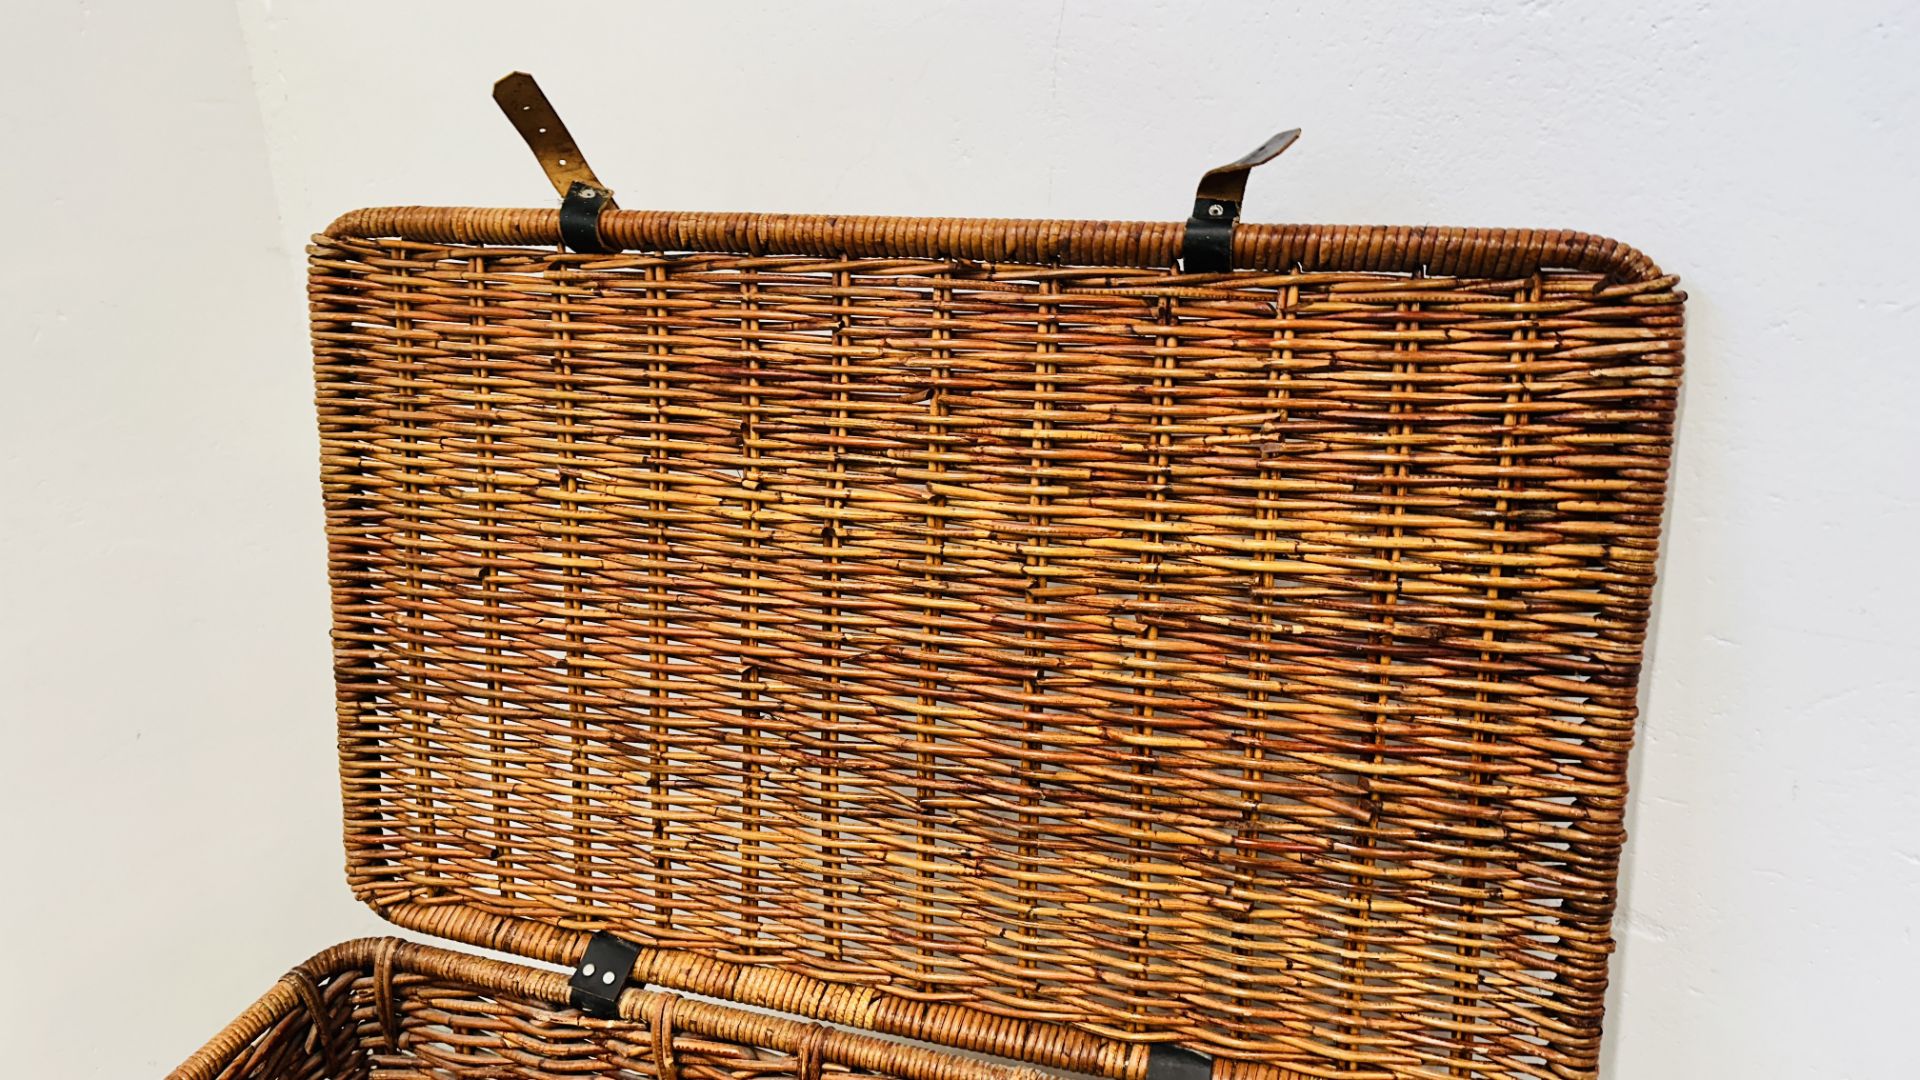 A LARGE WICKER TWO HANDLED BASKET - W 90 X D 55 X H 55CM. - Image 7 of 7